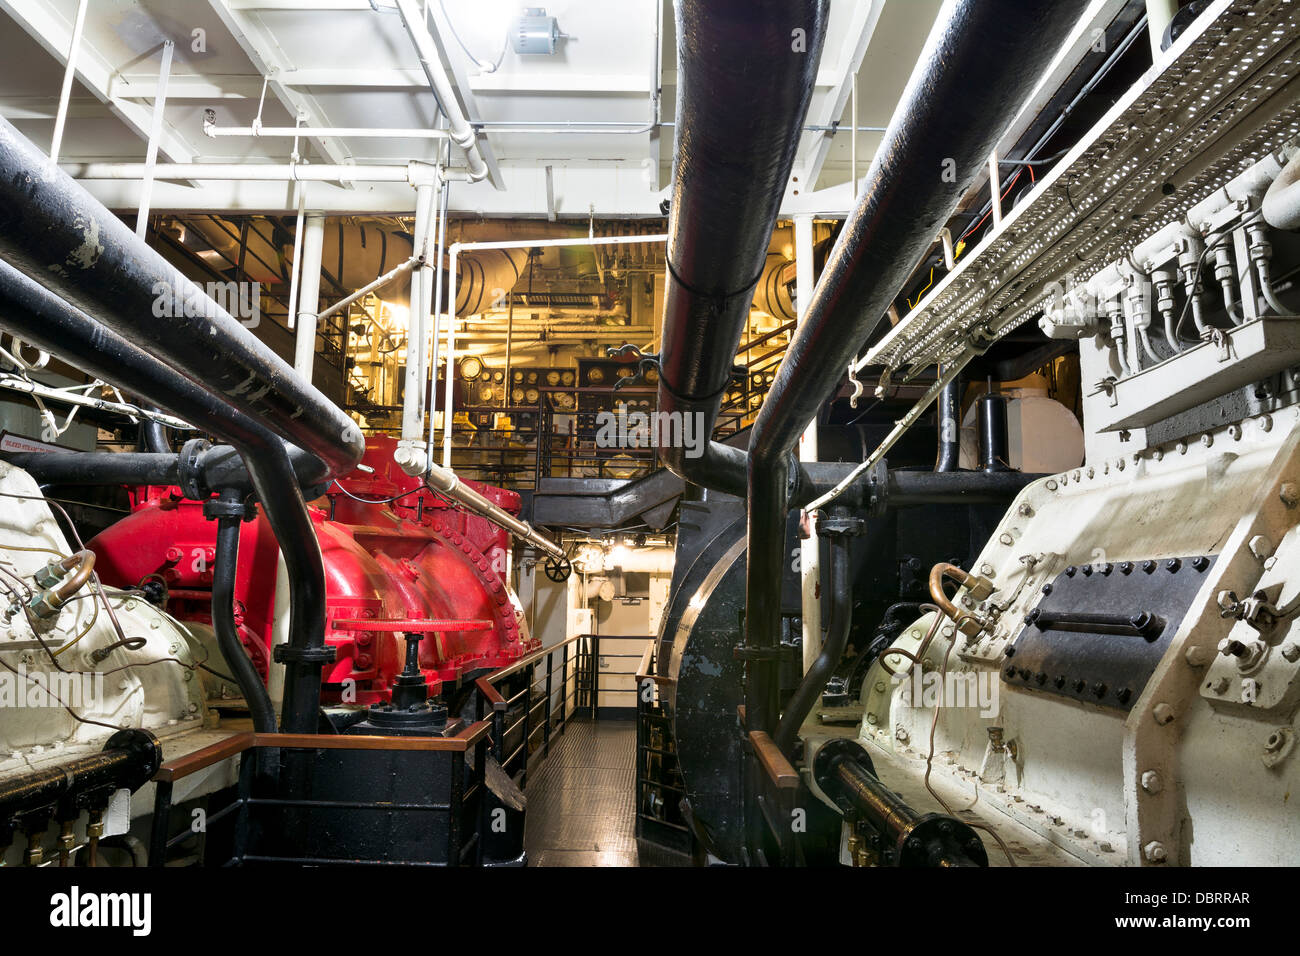 A section of the giant steam engine in the underbelly of the historic Queen Mary in Long Beach, California. Stock Photo